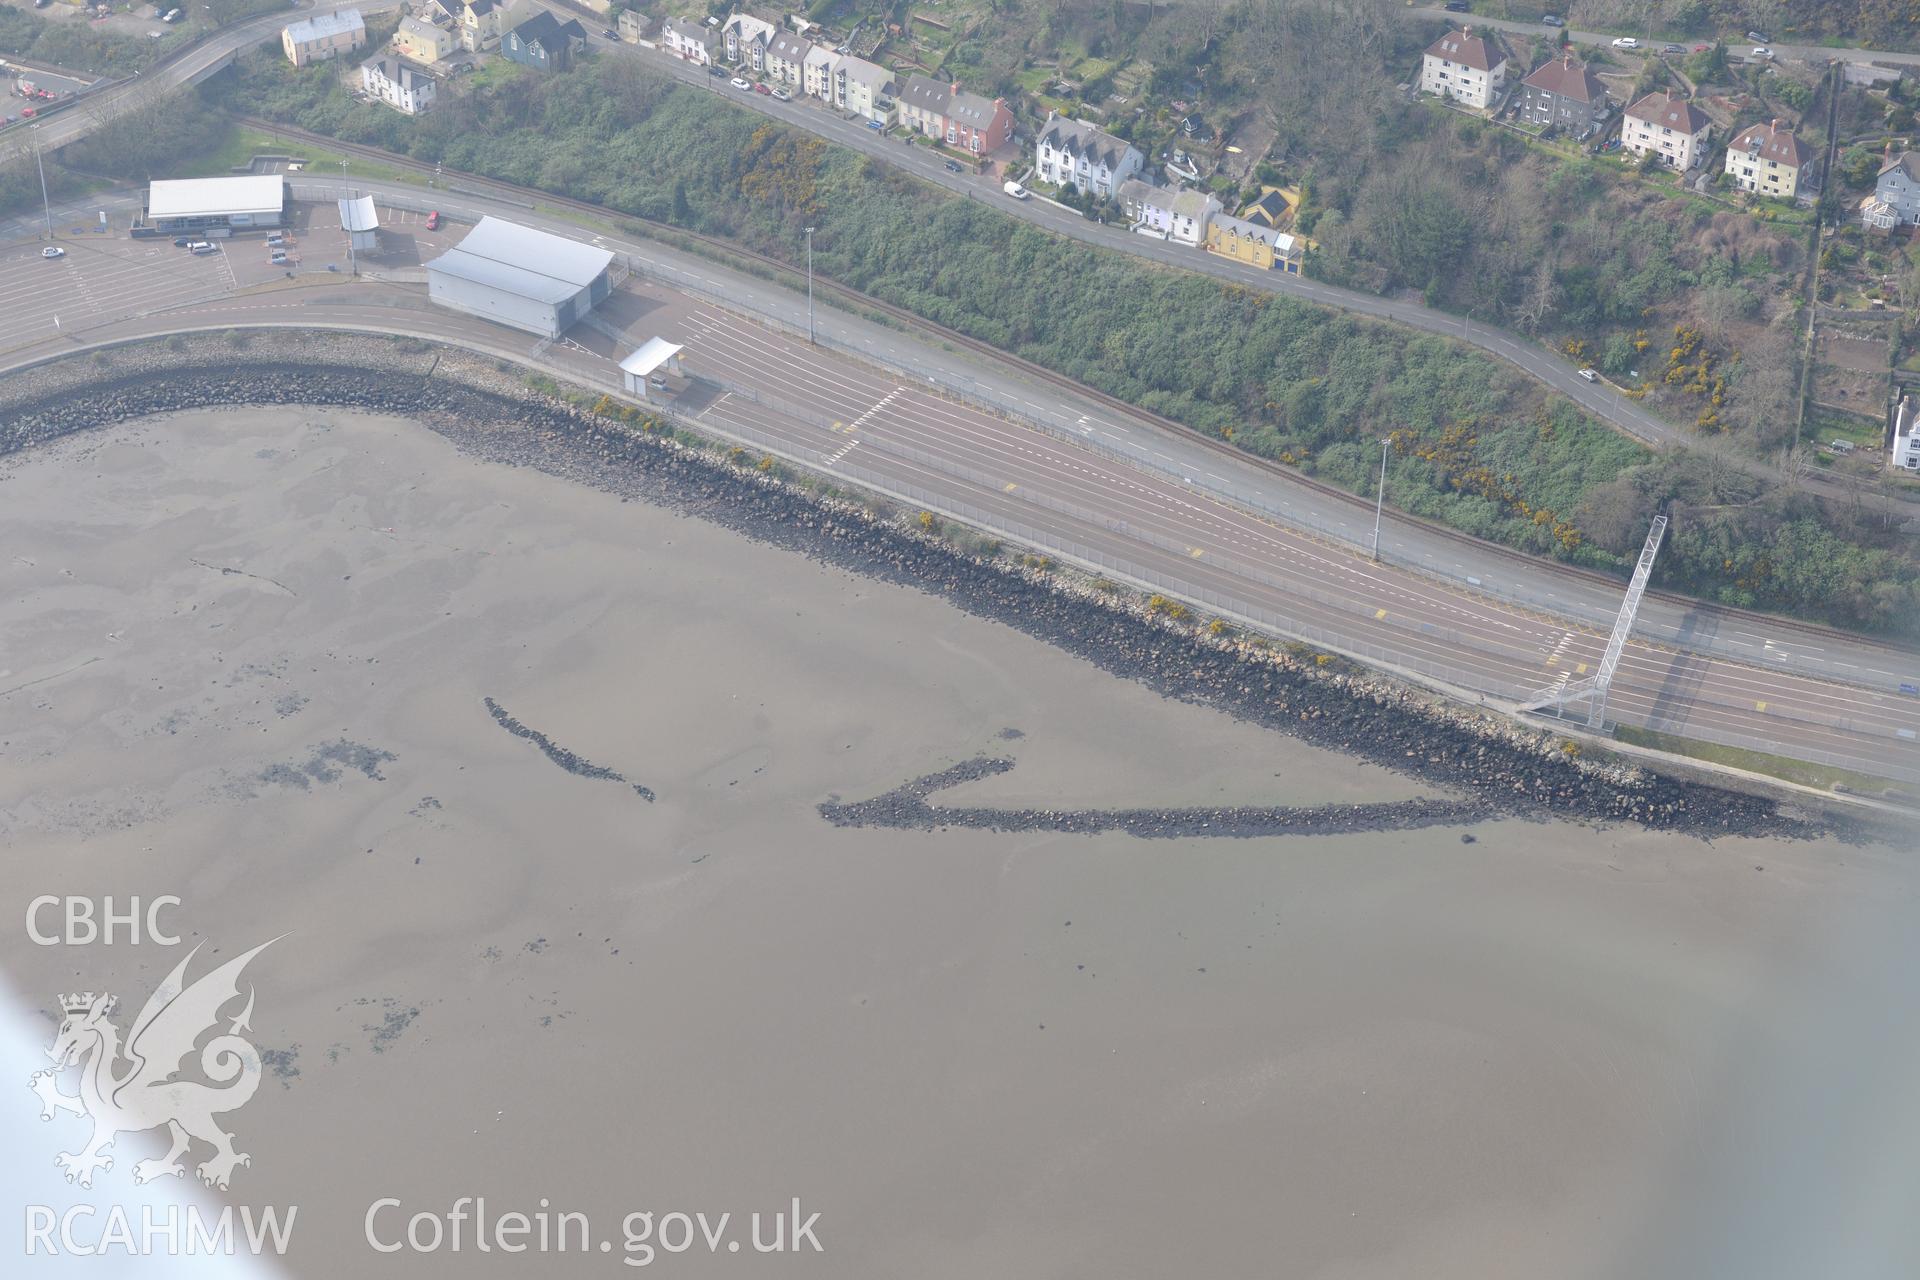 Royal Commission aerial photograph of fish trap at Fishguard taken on 27th March 2017. Baseline aerial reconnaissance survey for the CHERISH Project. ? Crown: CHERISH PROJECT 2017. Produced with EU funds through the Ireland Wales Co-operation Programme 2014-2020. All material made freely available through the Open Government Licence.